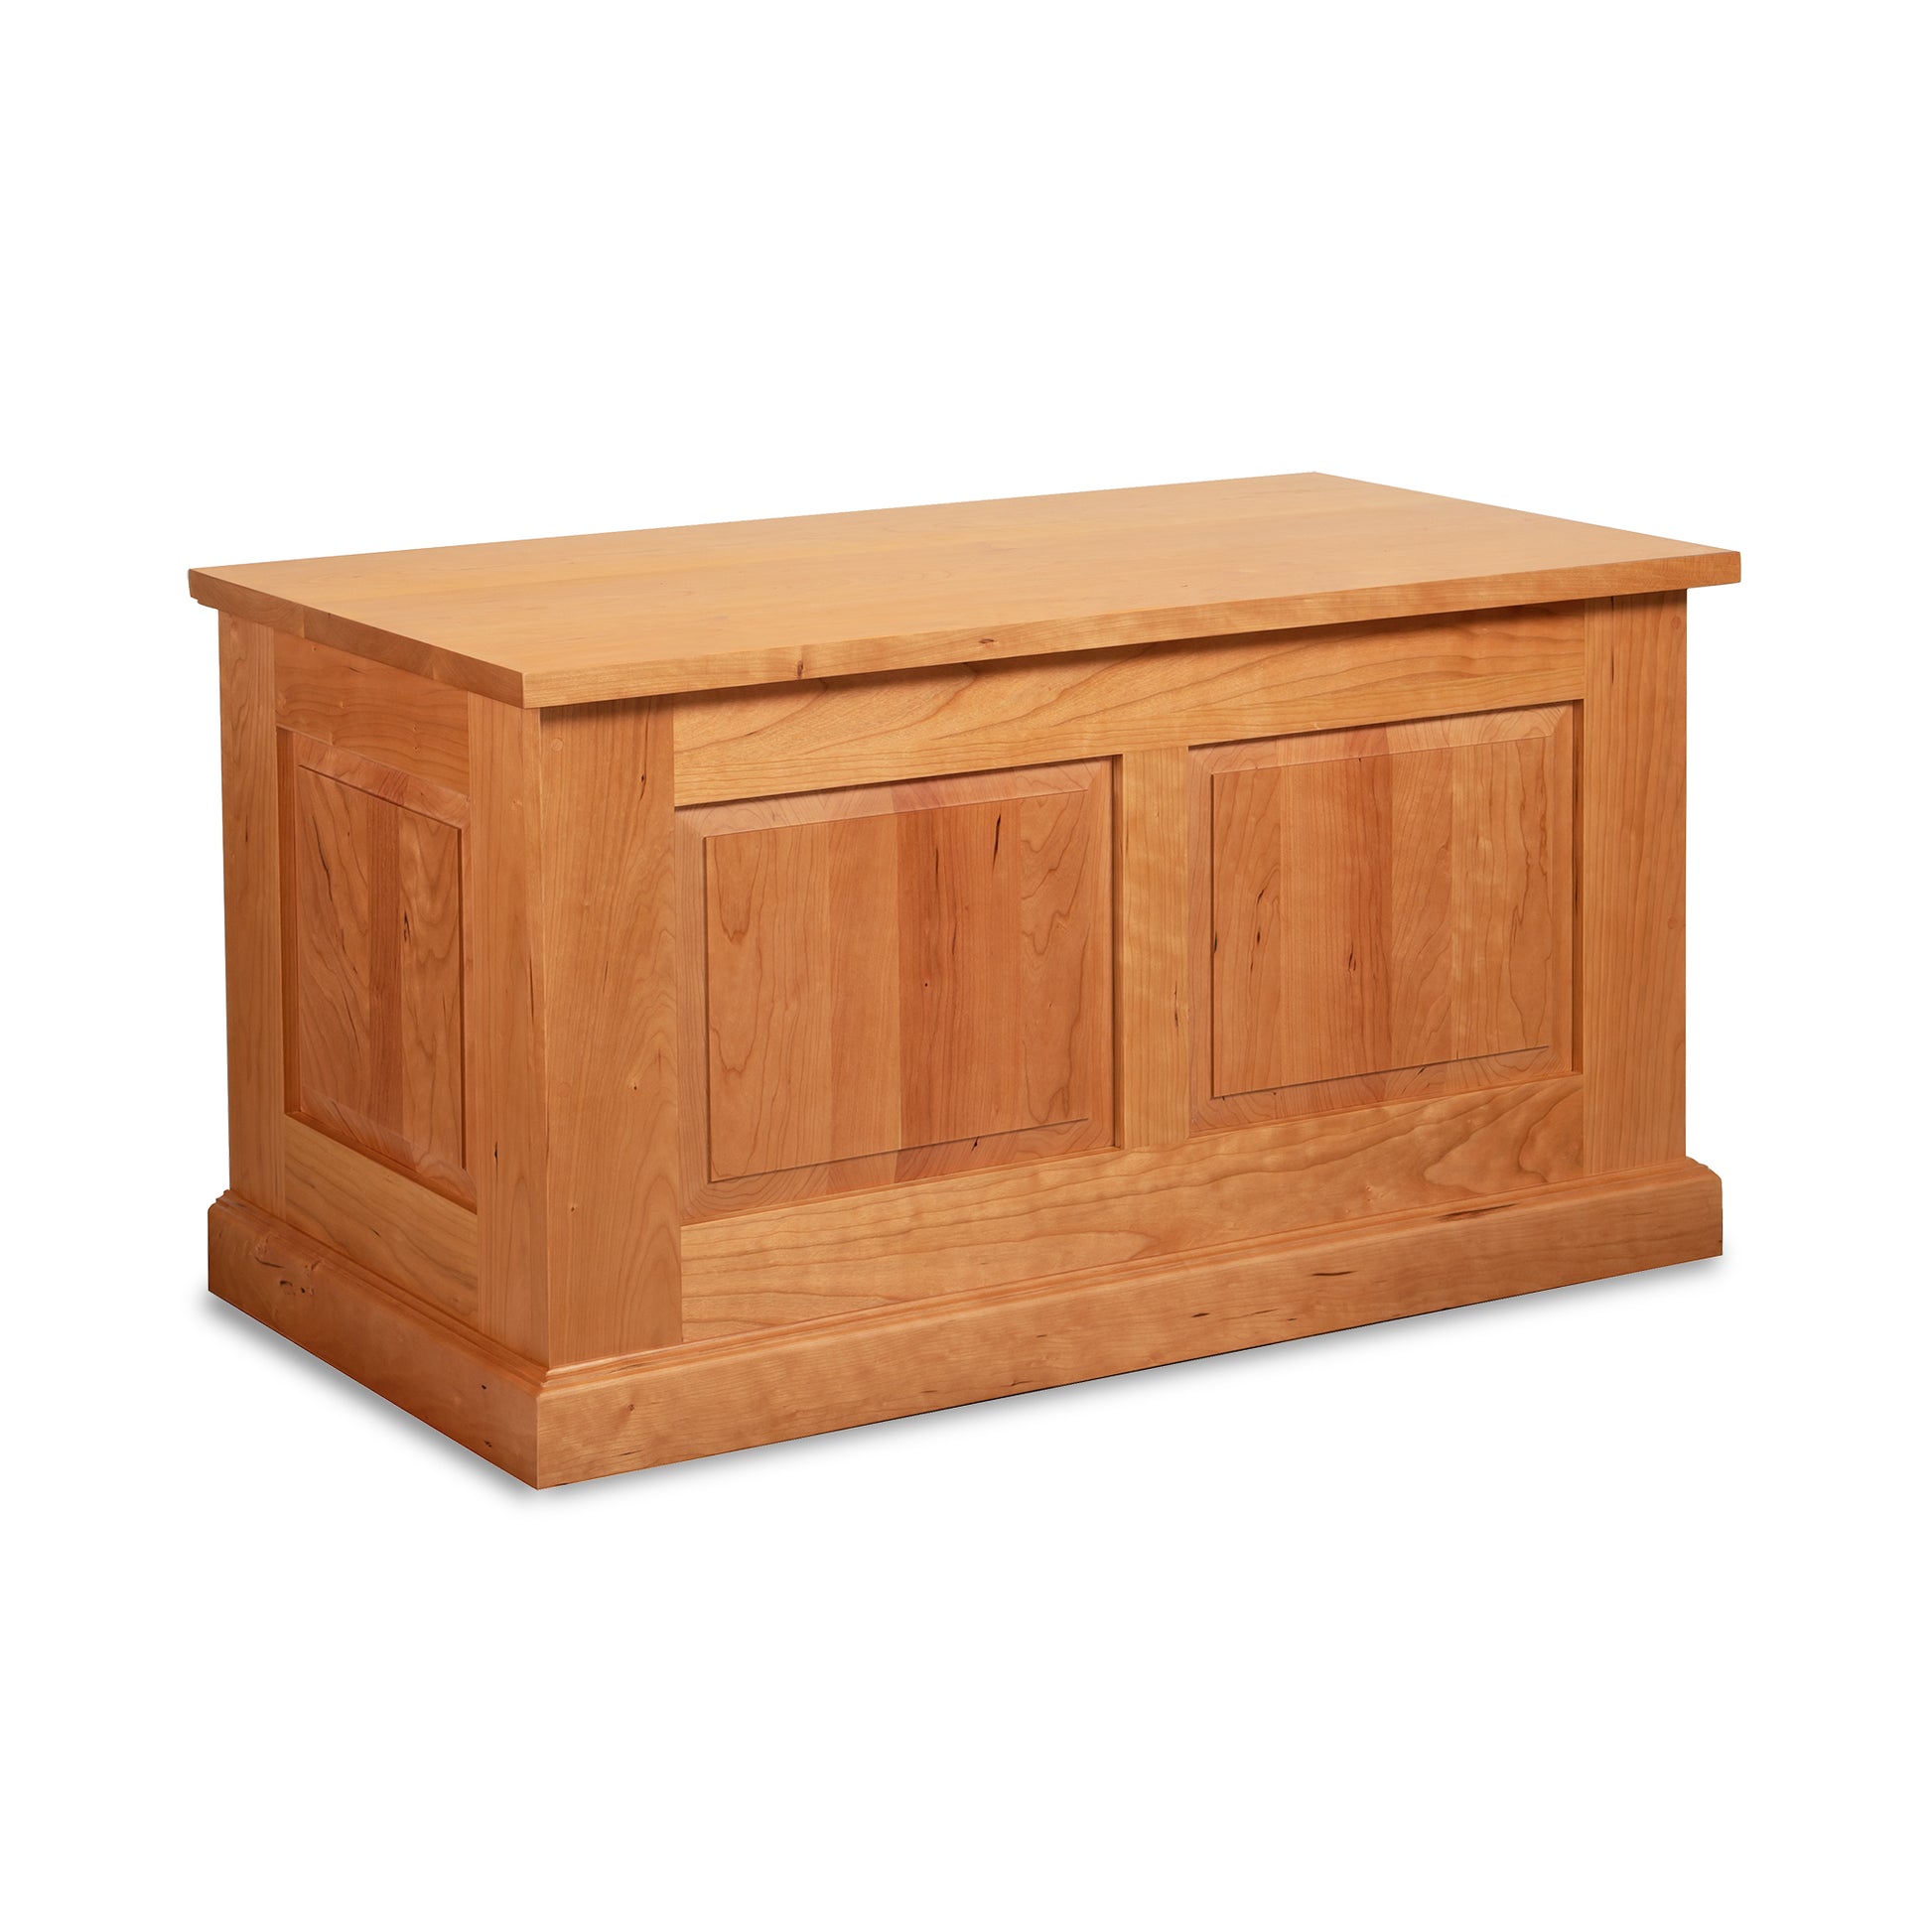 A sustainably harvested wooden chest with two doors, made from North American hardwoods. This small Lyndon Furniture New England Shaker Blanket Box provides a beautiful storage solution for any space.